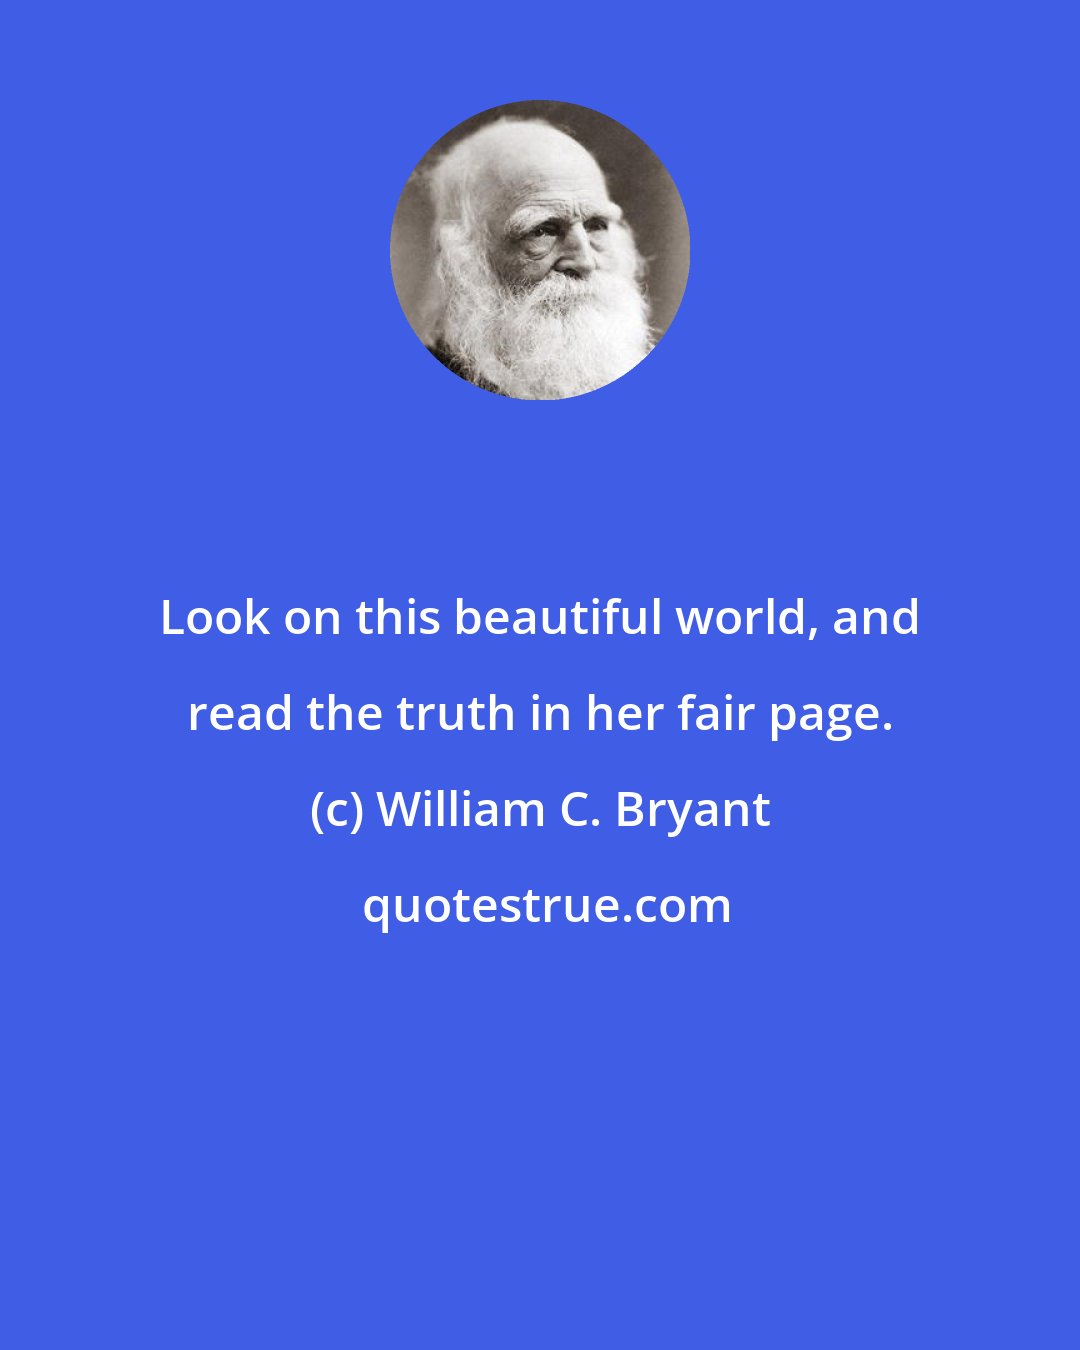 William C. Bryant: Look on this beautiful world, and read the truth in her fair page.